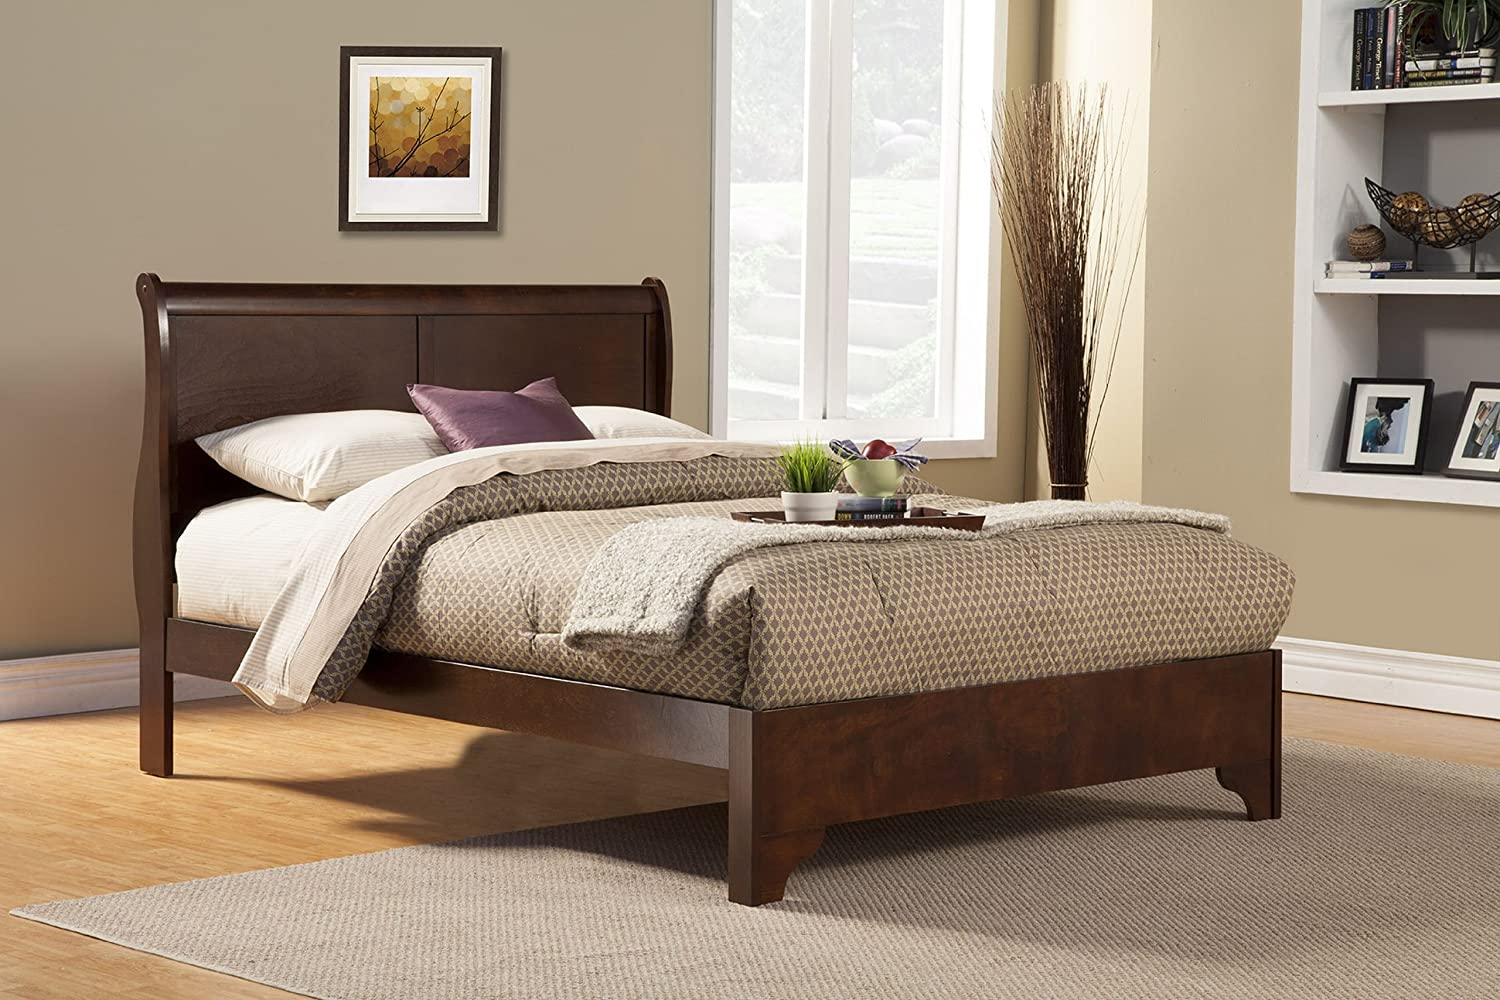 A low footboard sleigh bed provides a traditional look blended with a modern design.